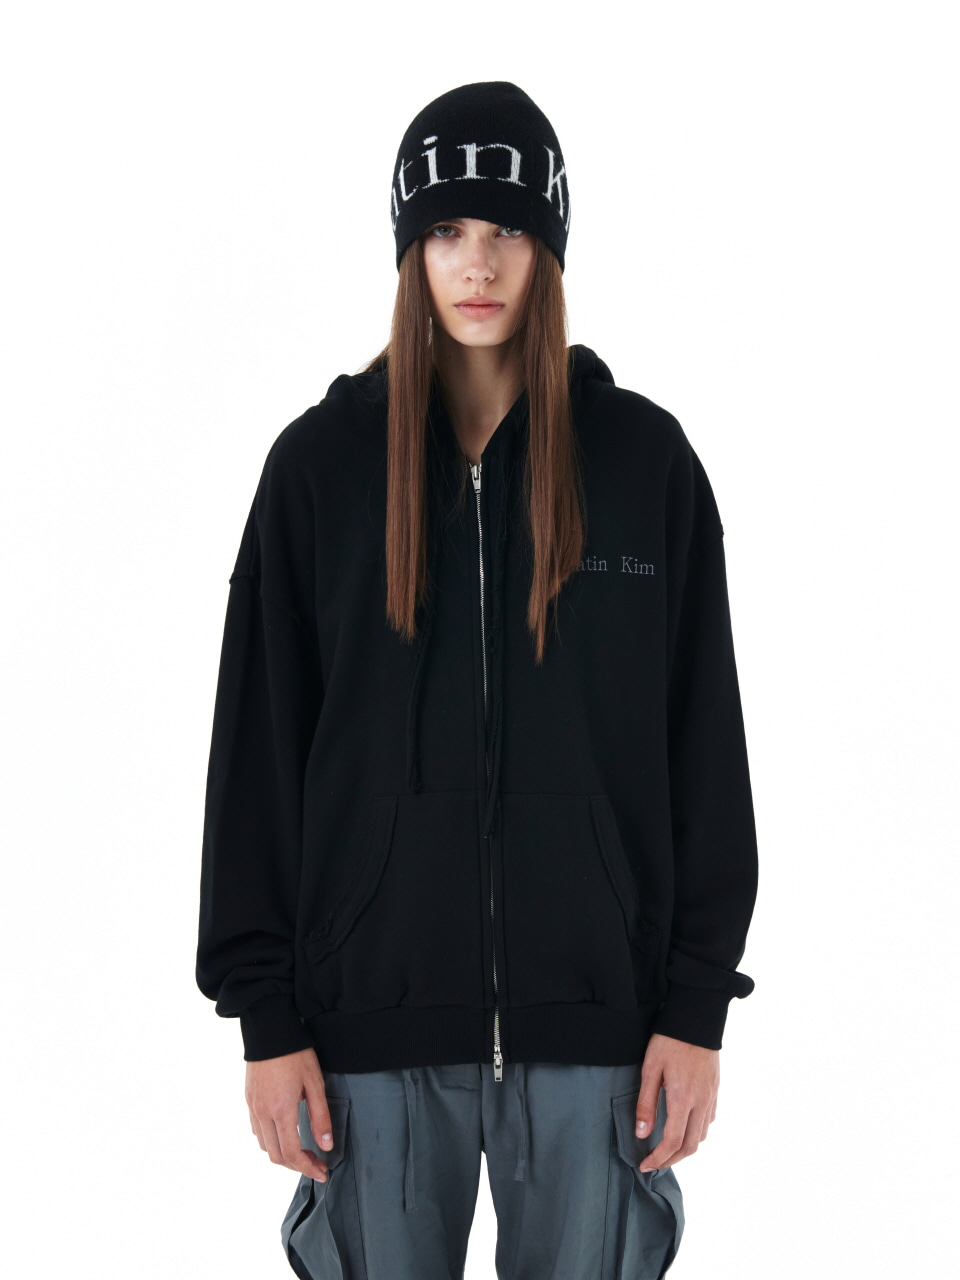 MATIN SOLID LOGO ZIP-UP IN BLACK